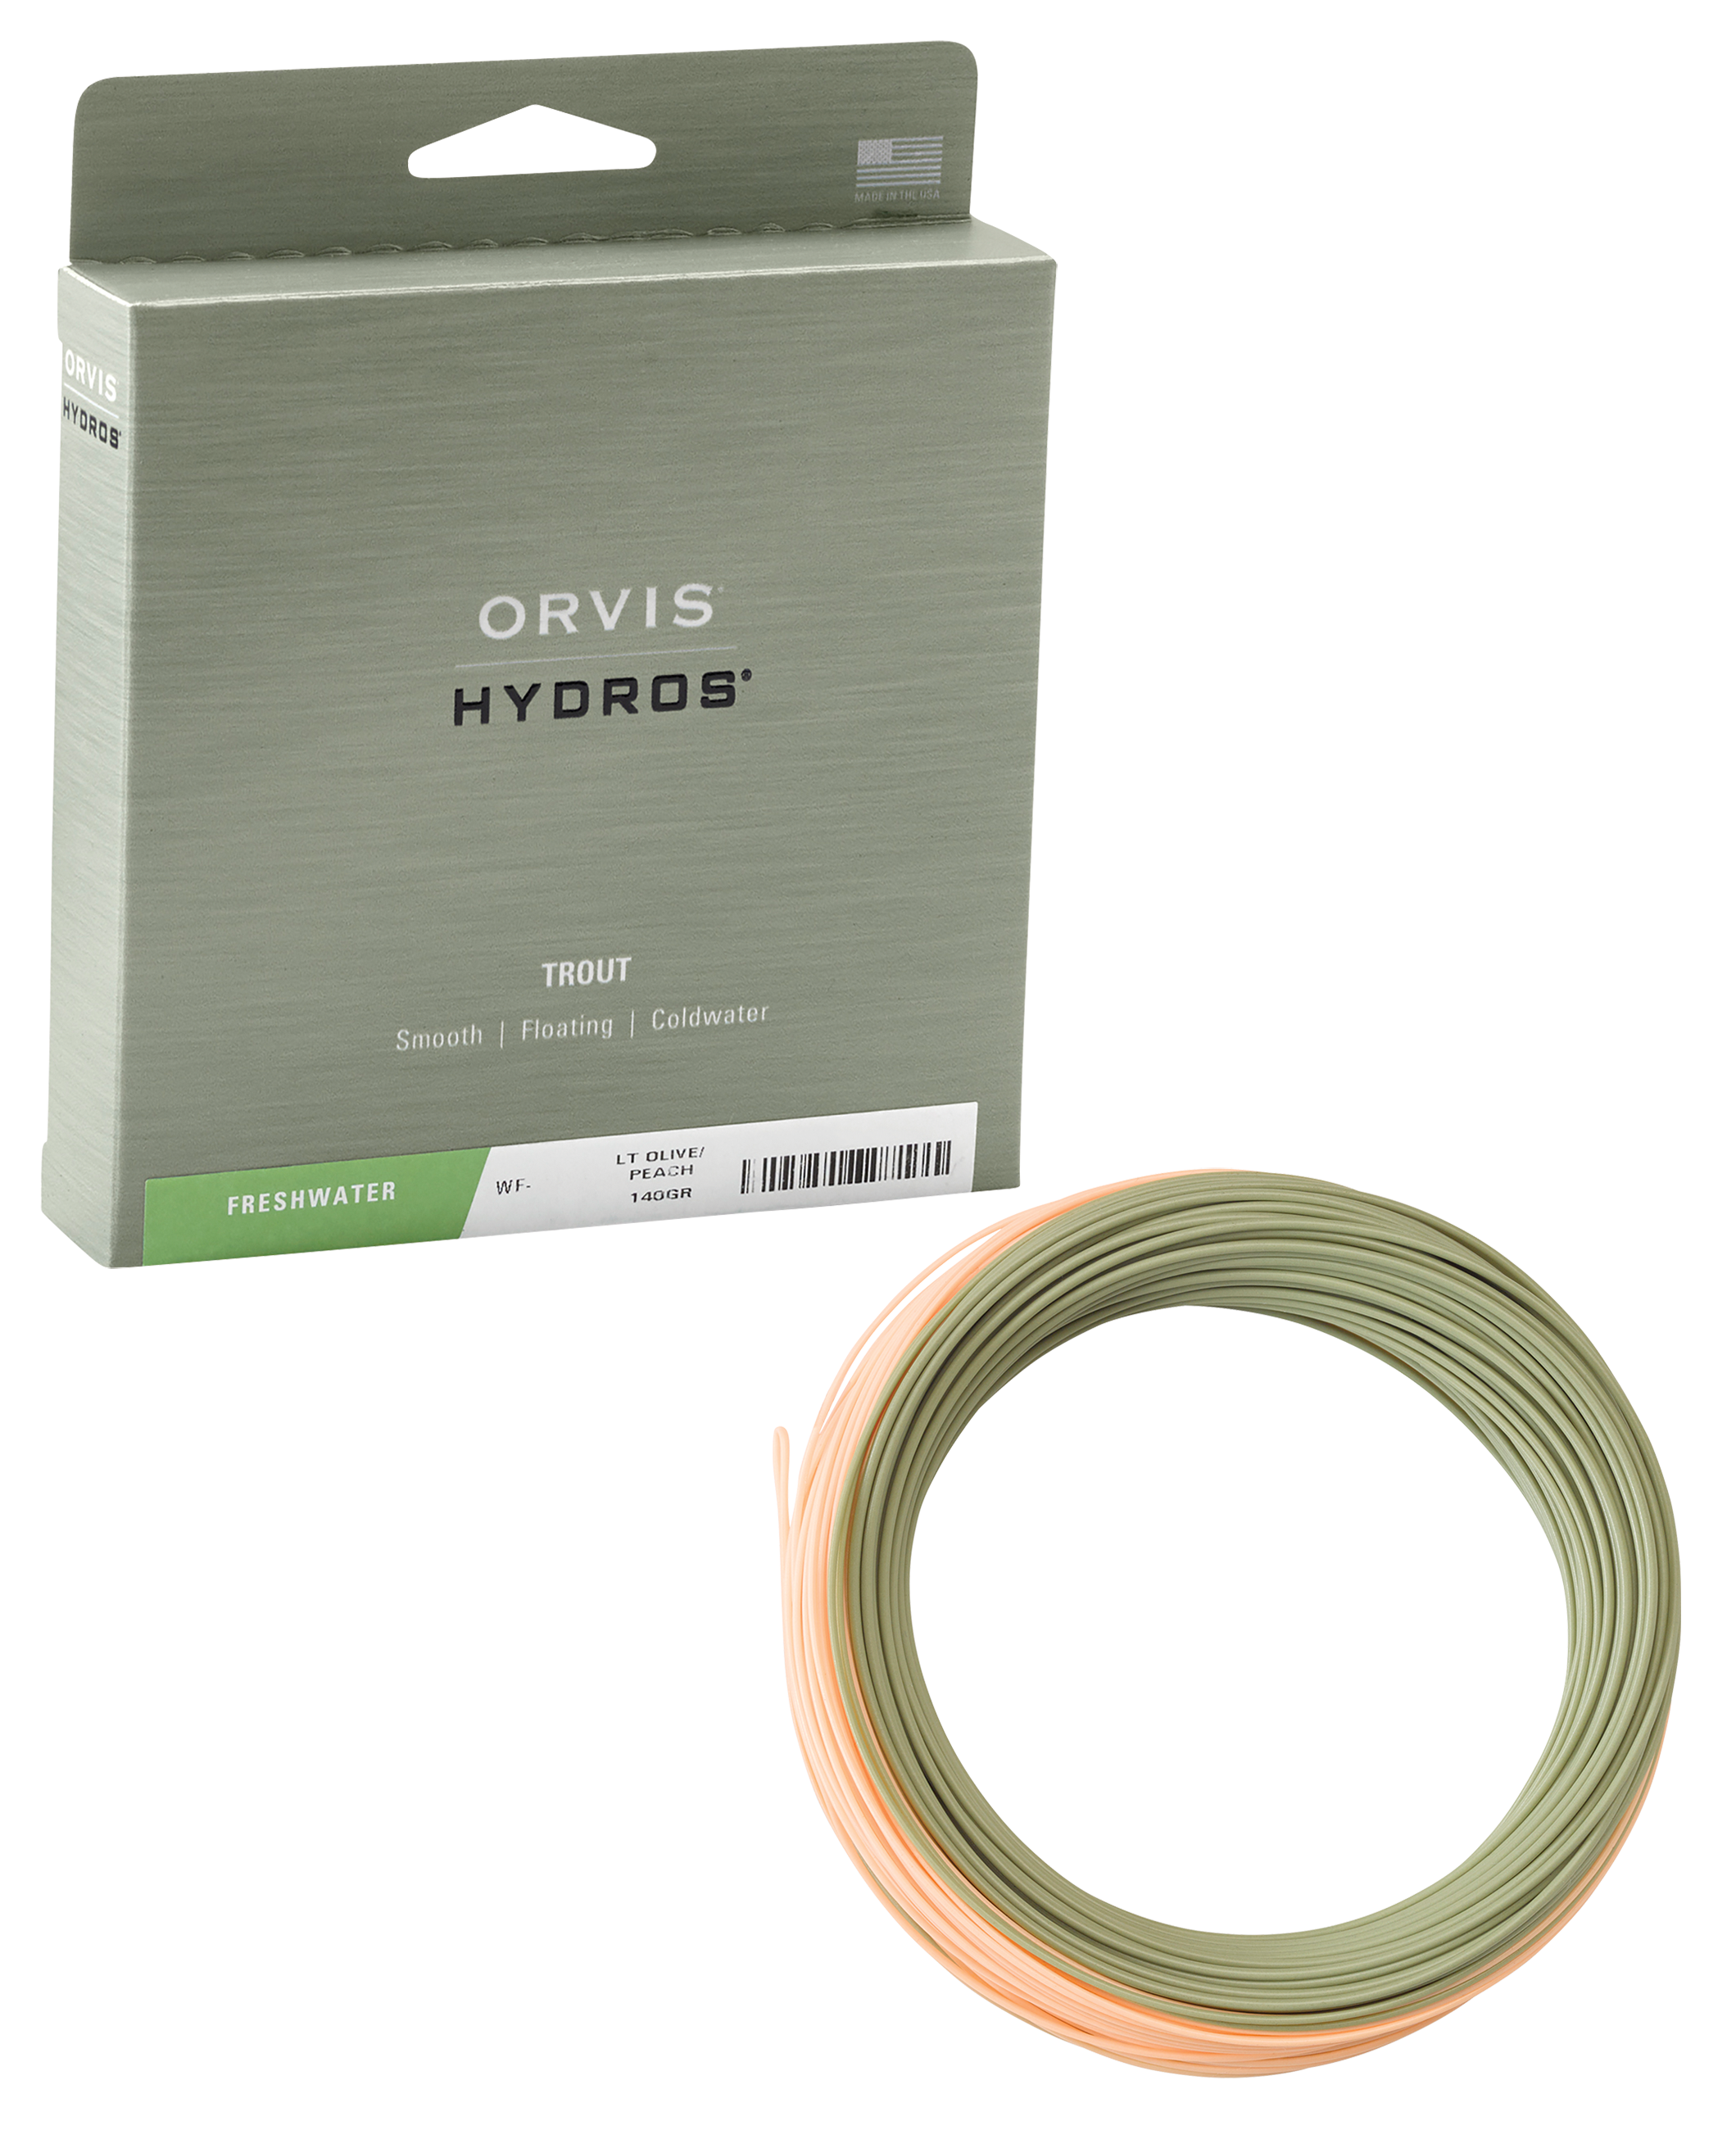 Hydros Saltwater Fly Line Smooth - Black Dog Outdoor Sports